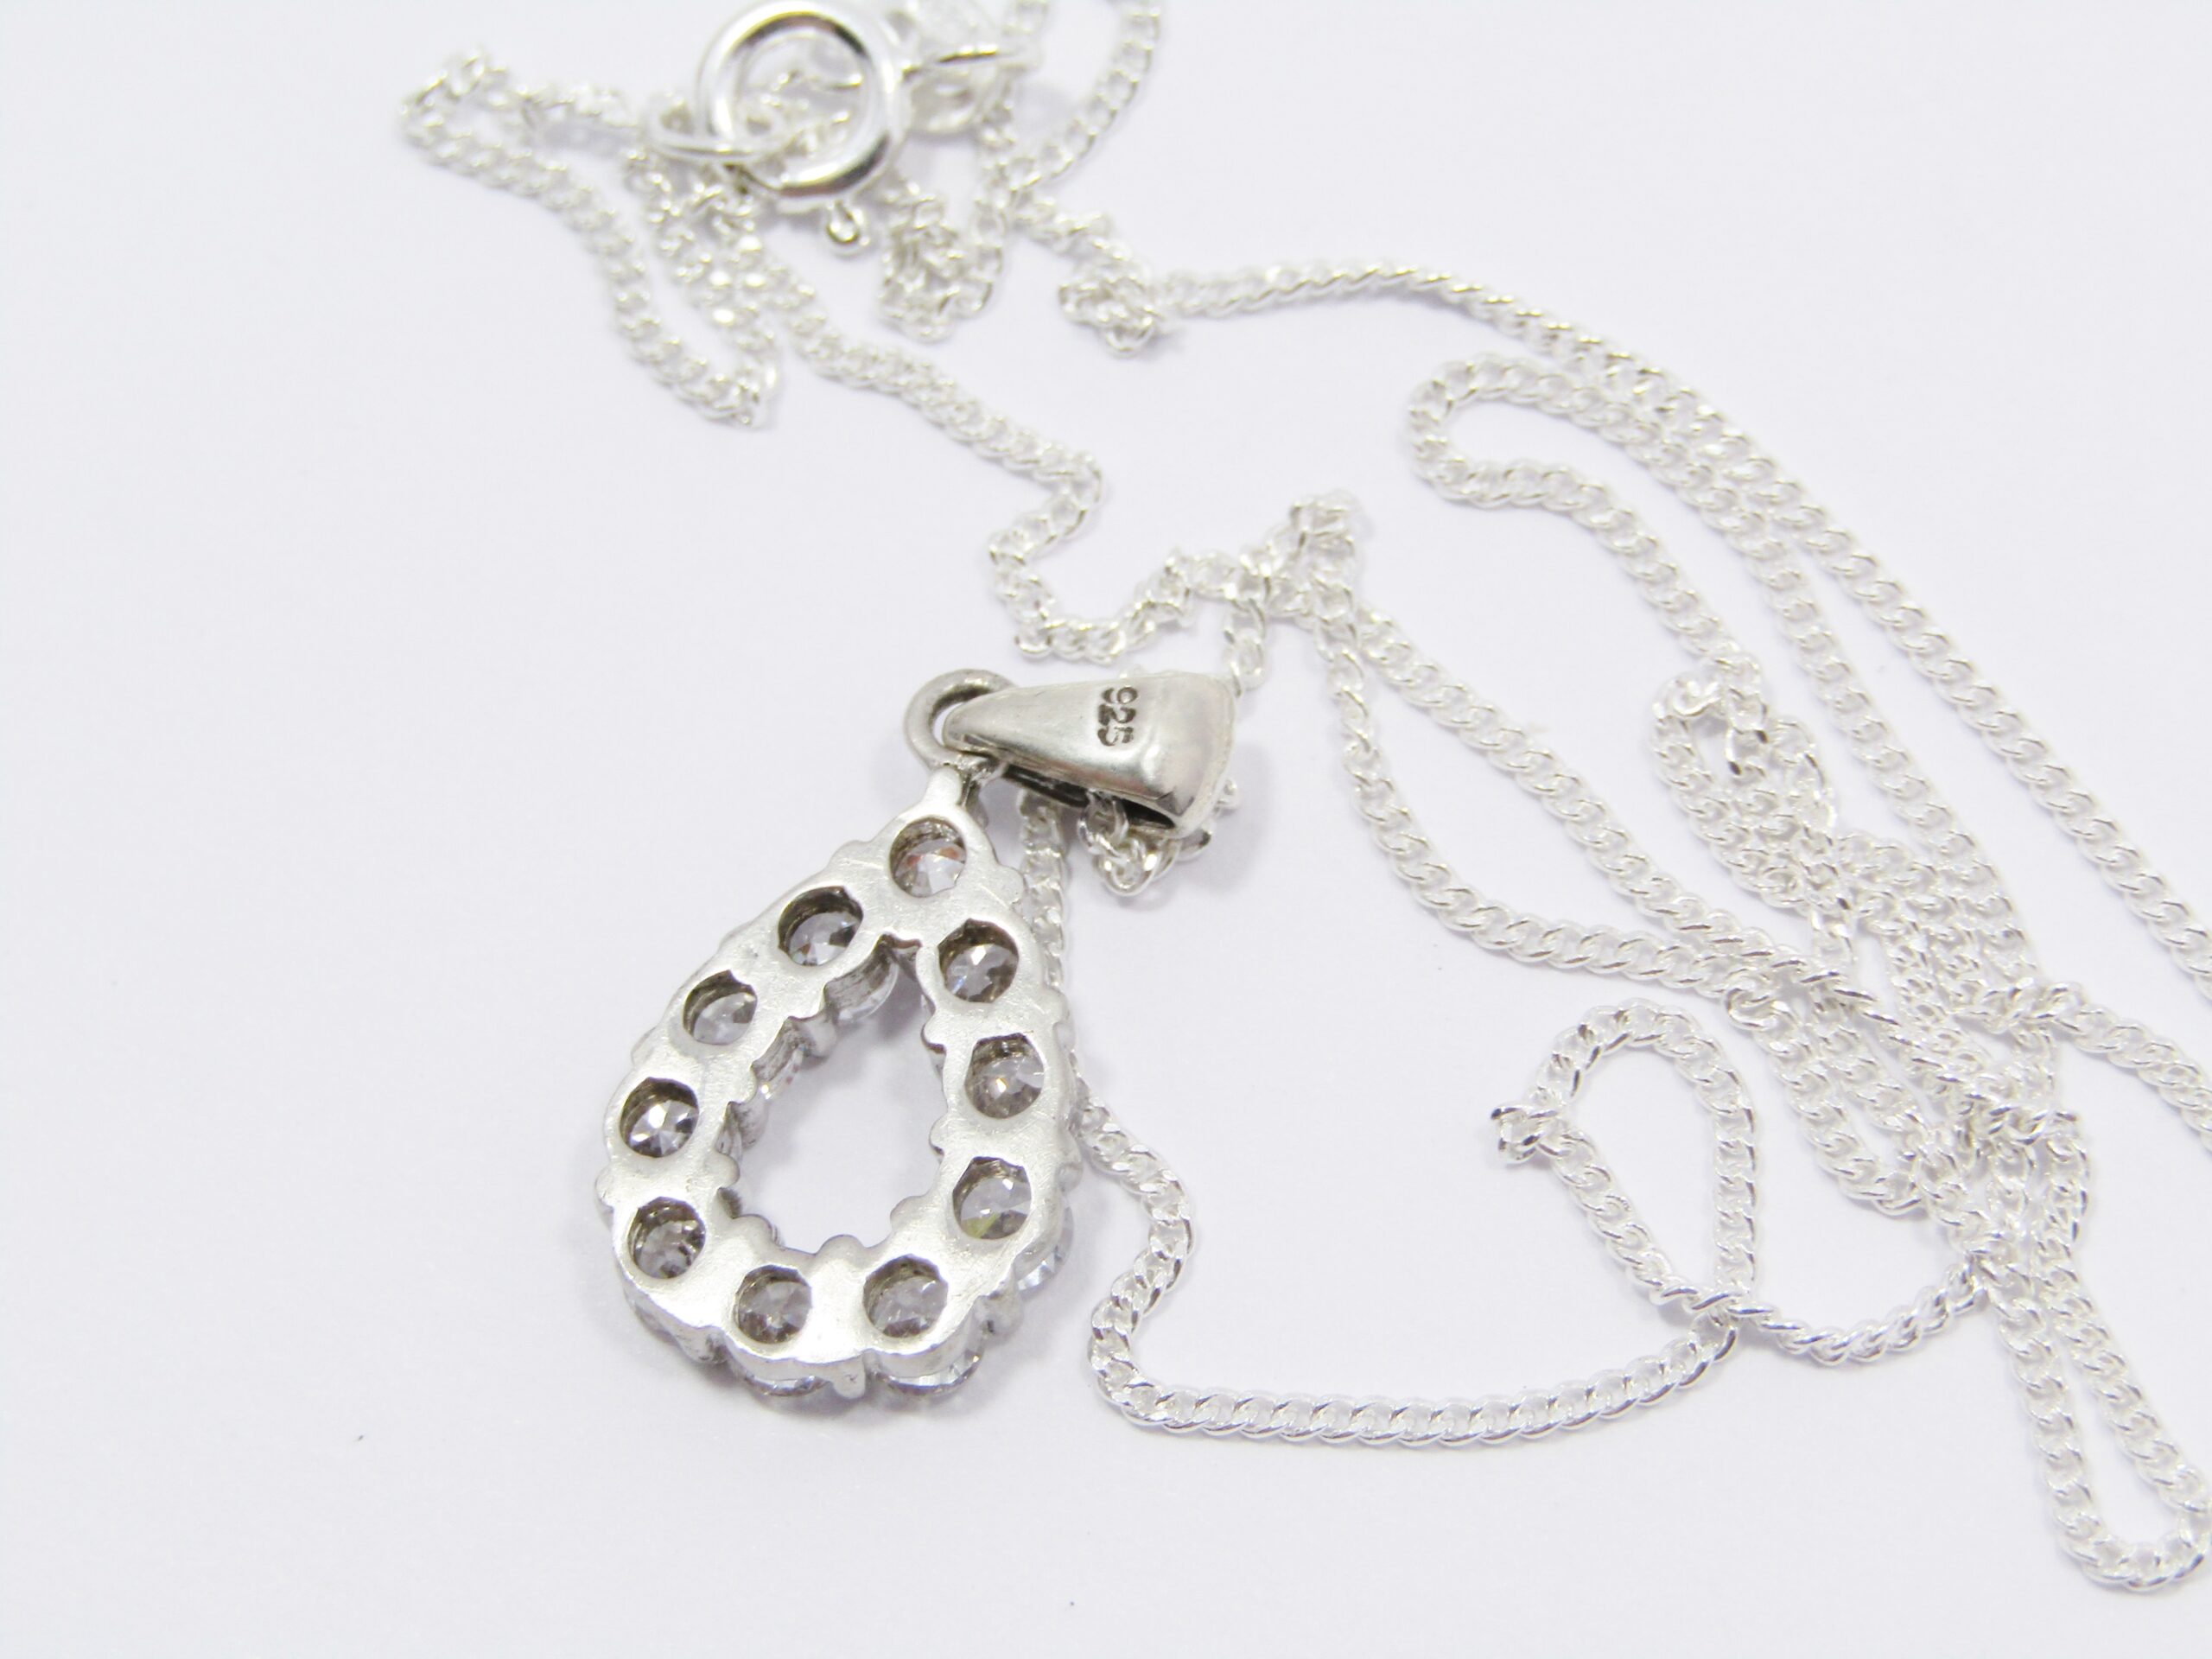 A Lovely Clear Zirconia Pendant on Chain in Sterling Silver